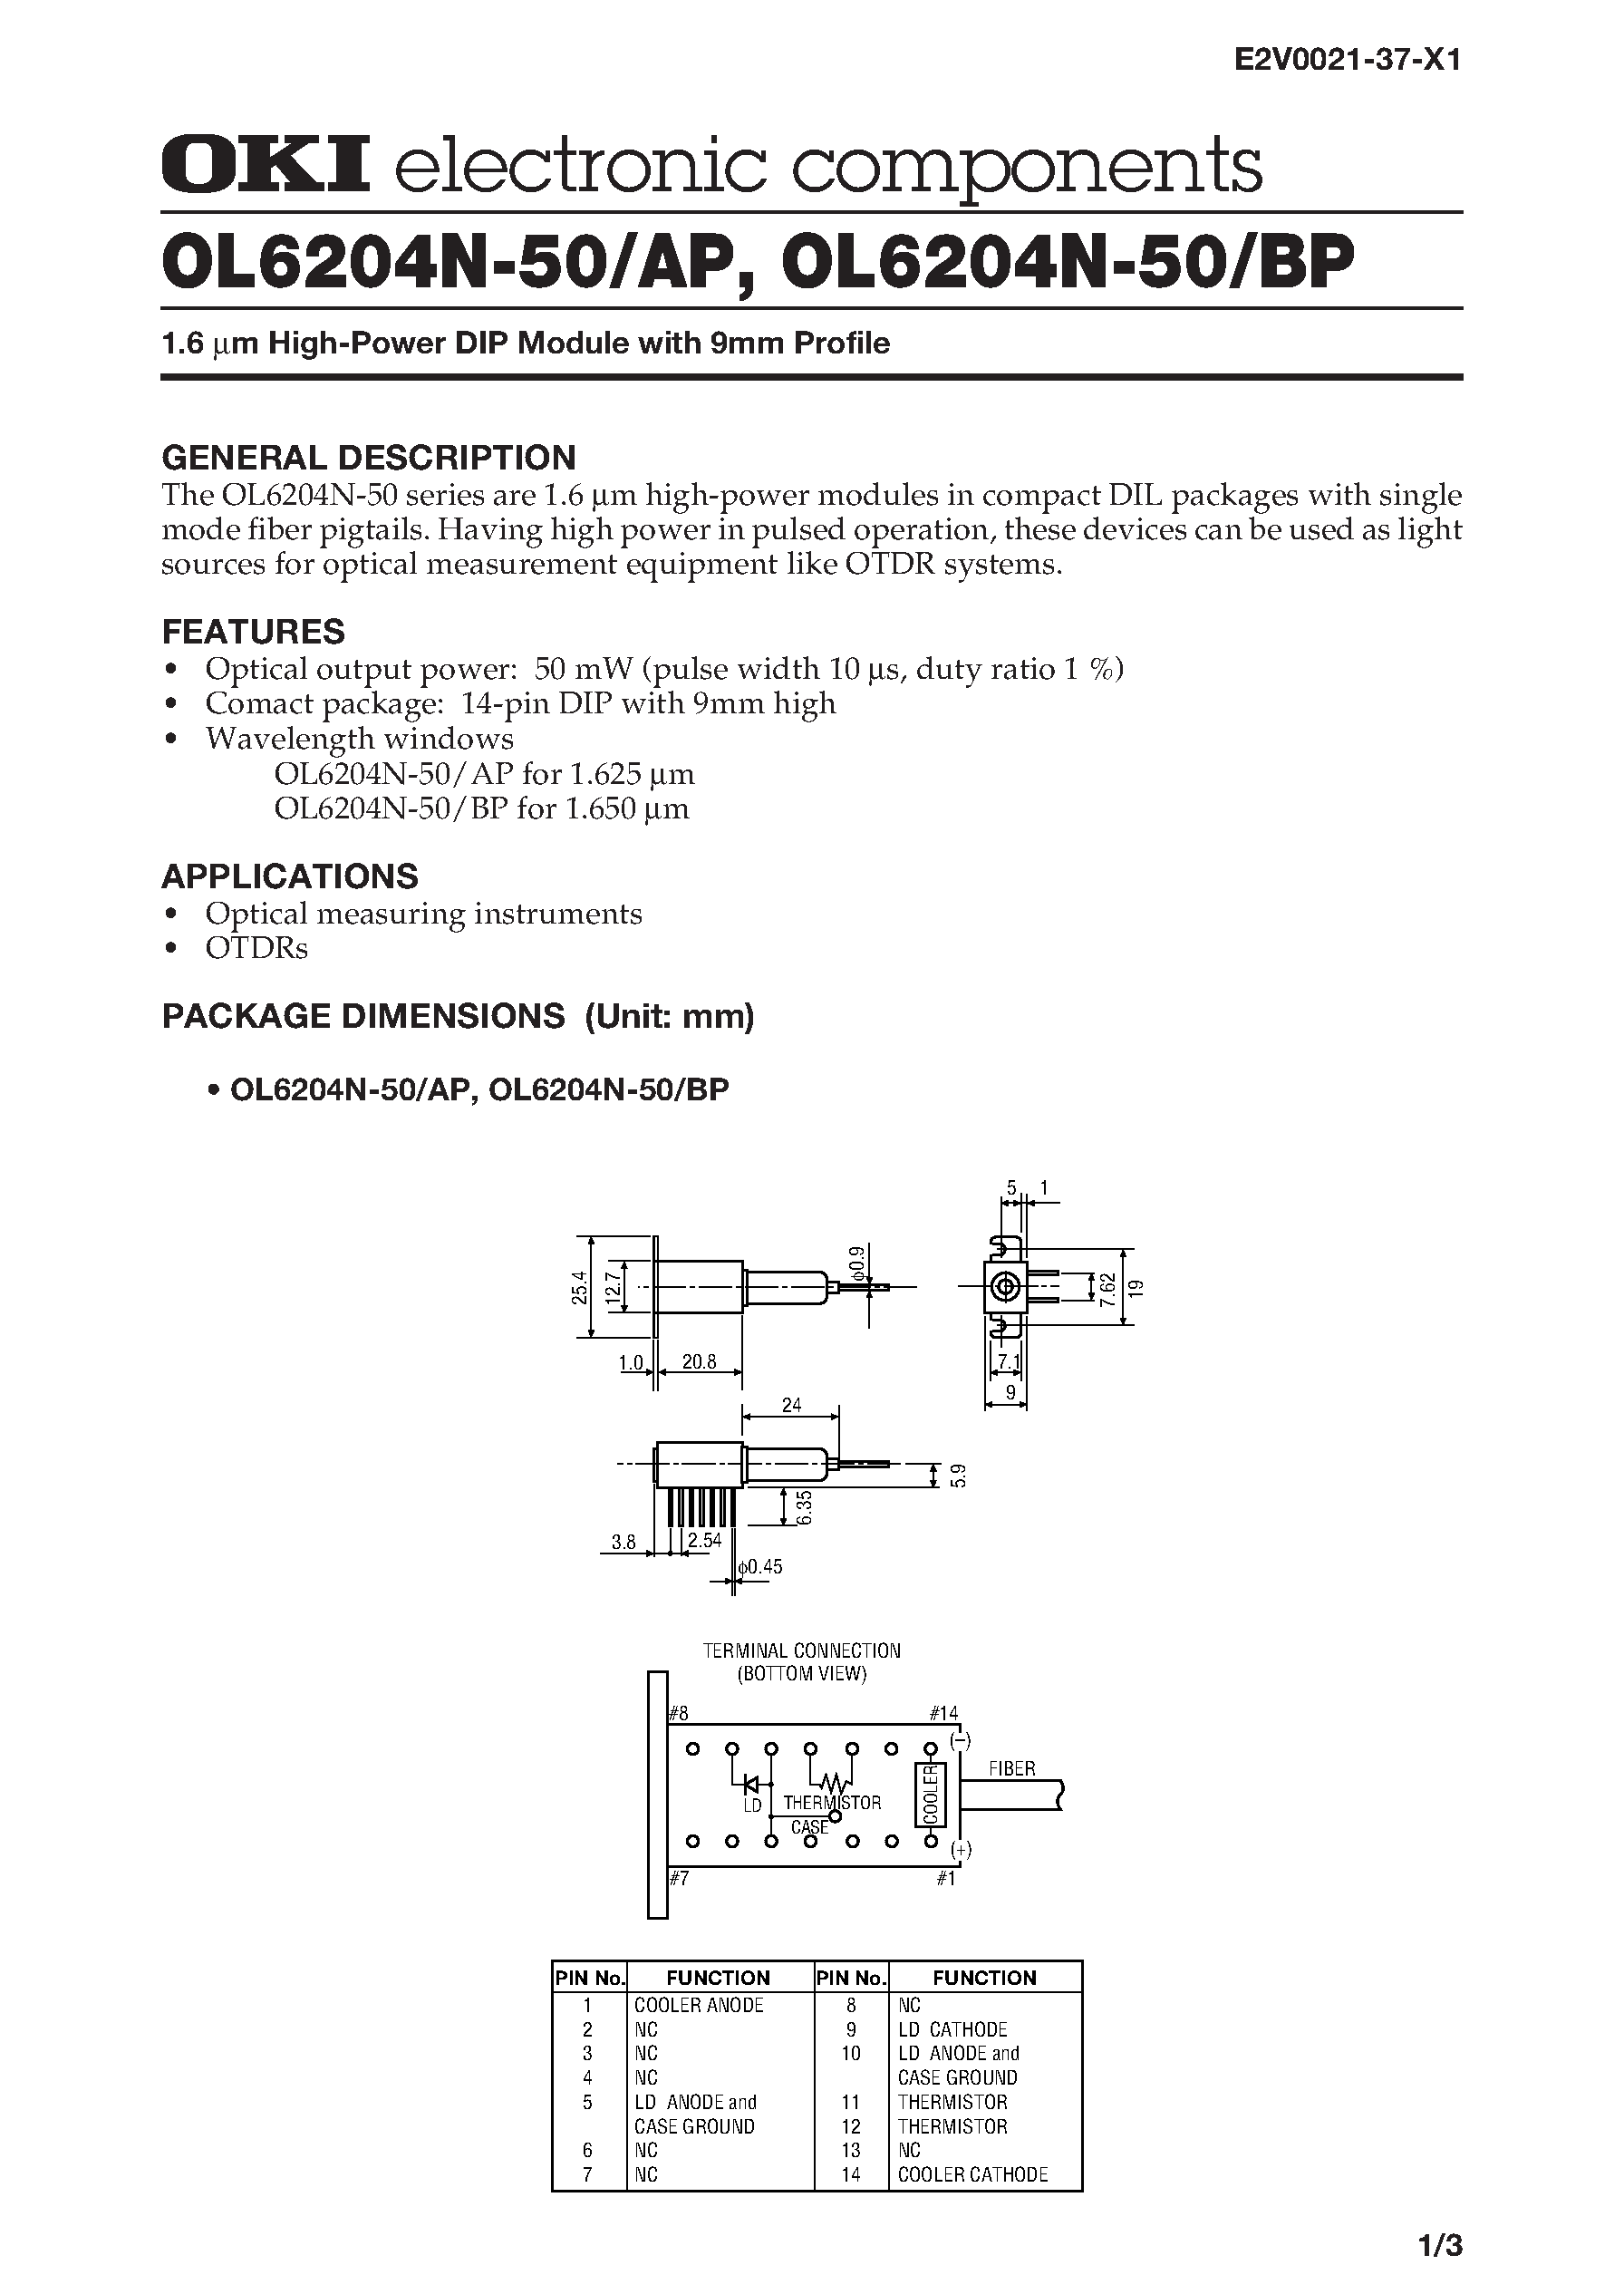 Datasheet OL6204N-50 - 1.6 m High-Power DIP Module with 9mm Profile page 1